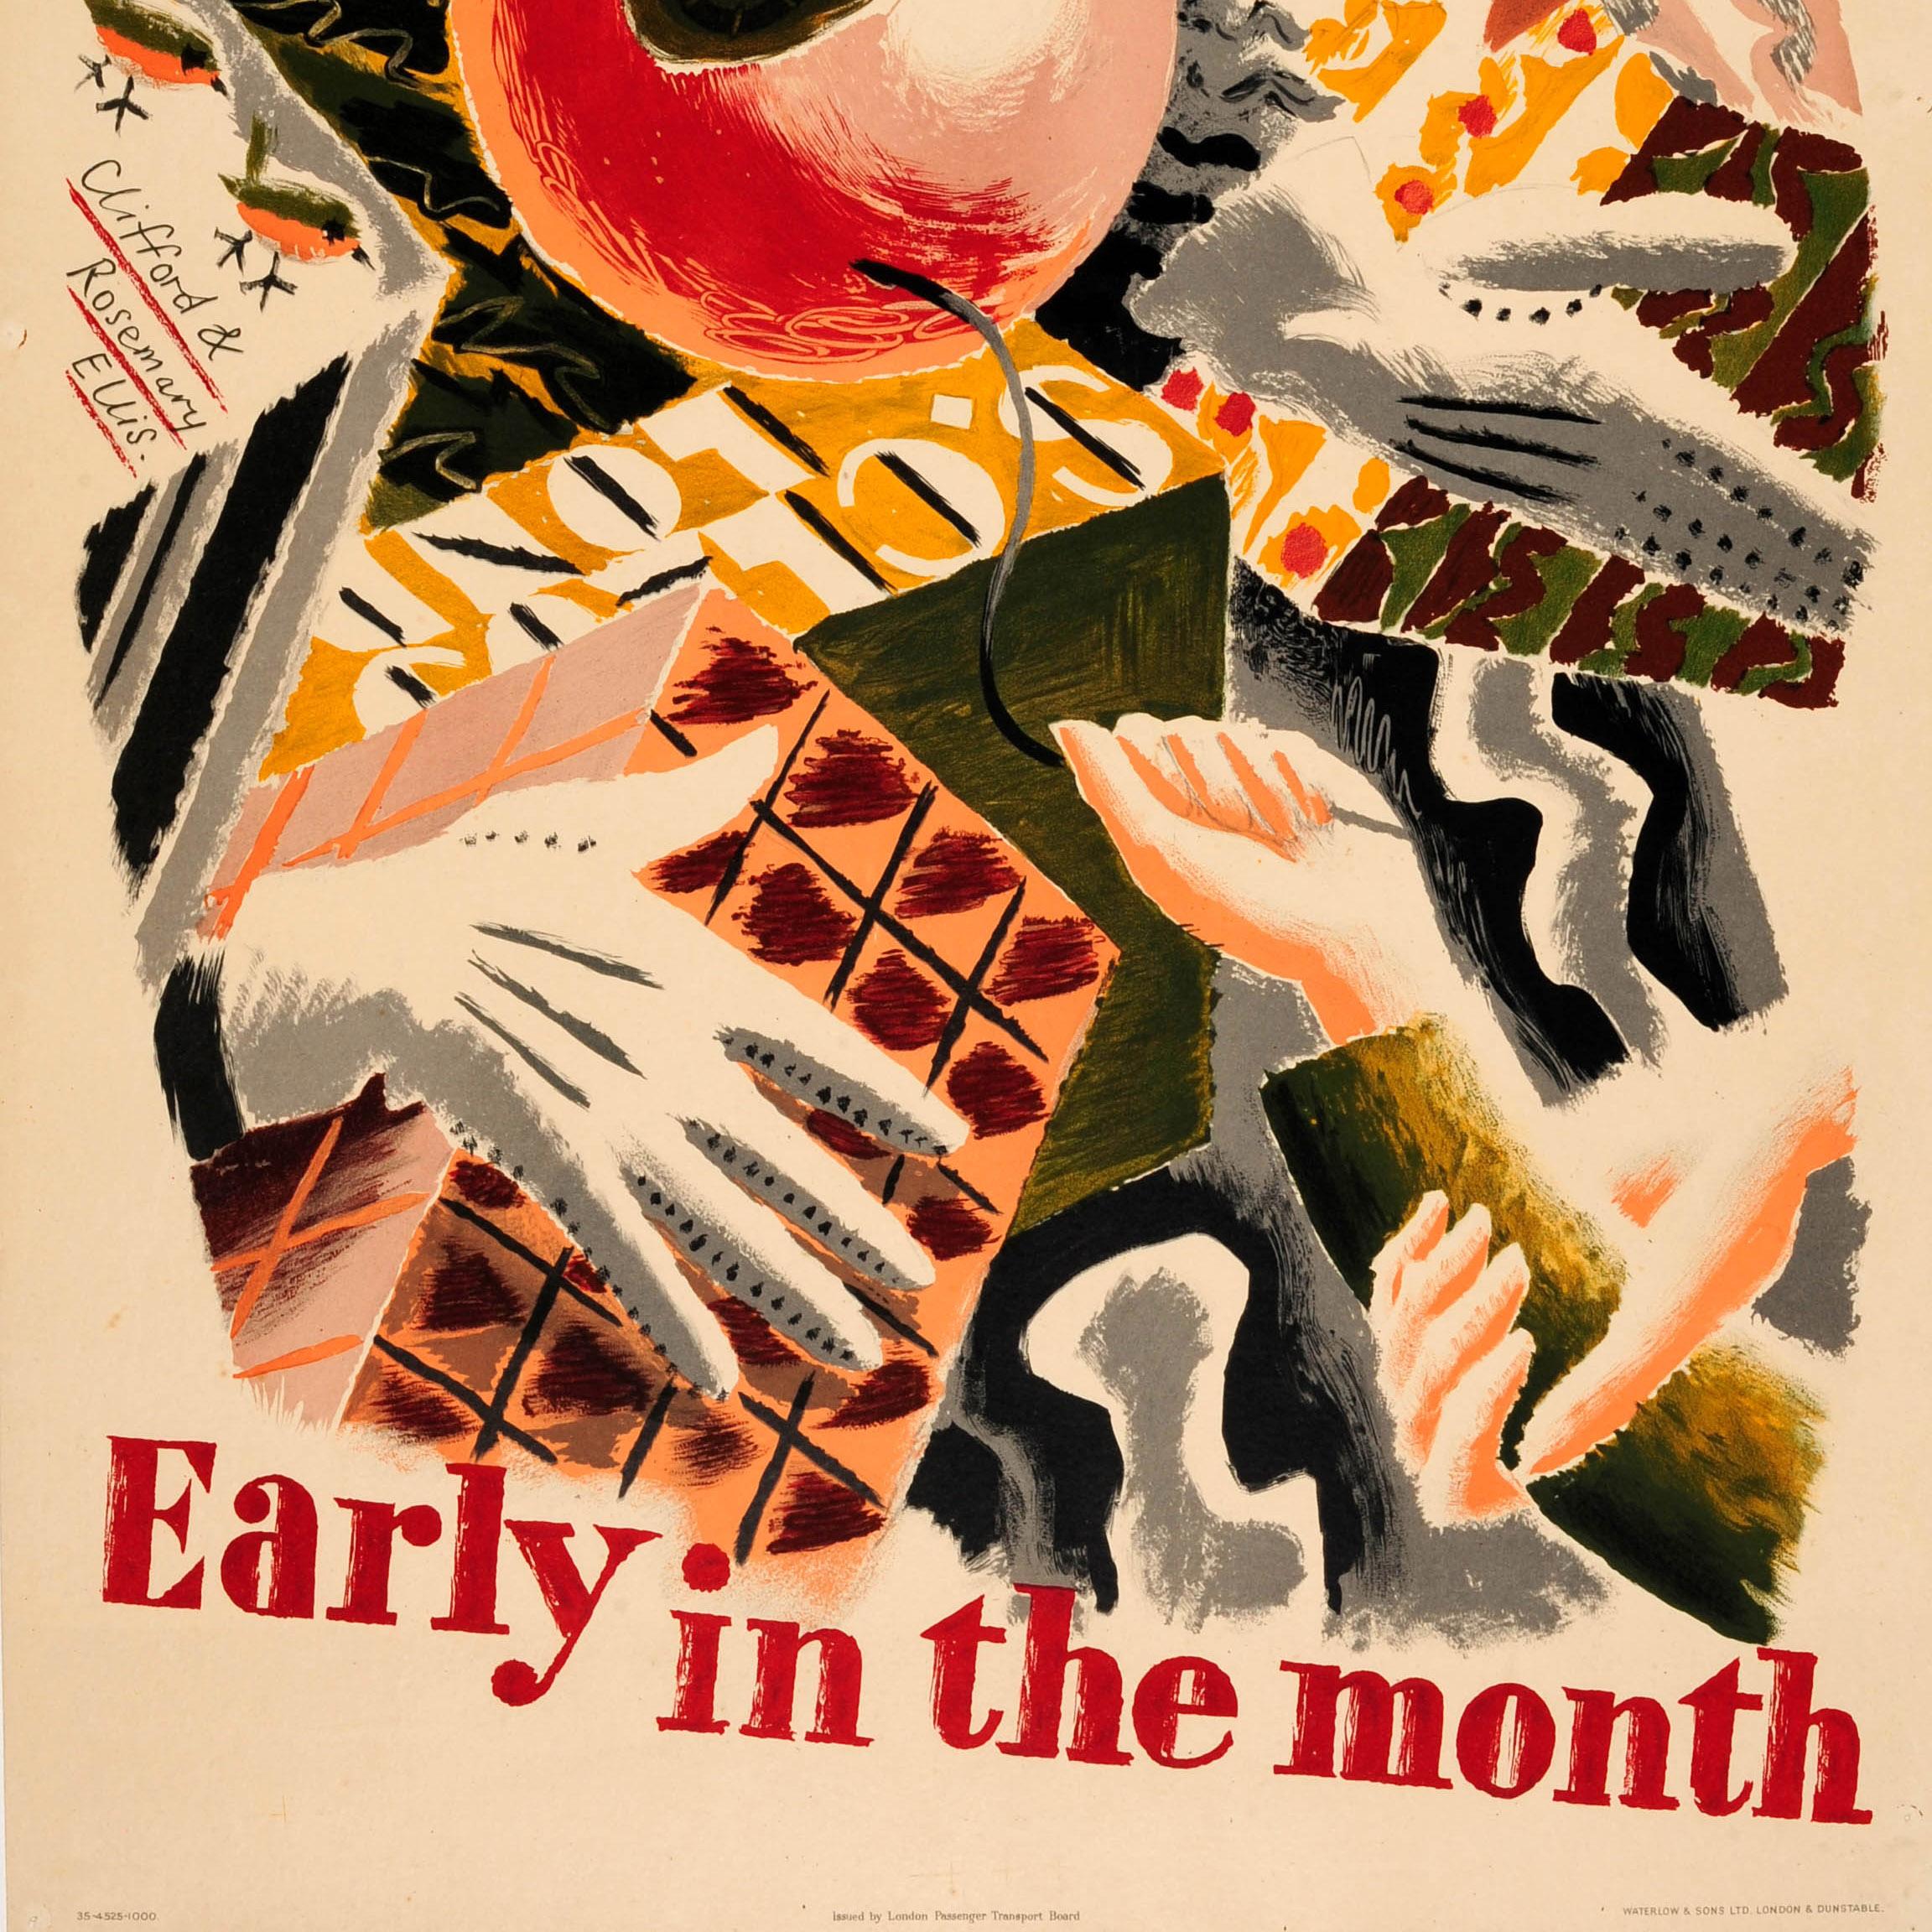 British Original Vintage London Transport Poster It Is Better To Shop Early In The Month For Sale